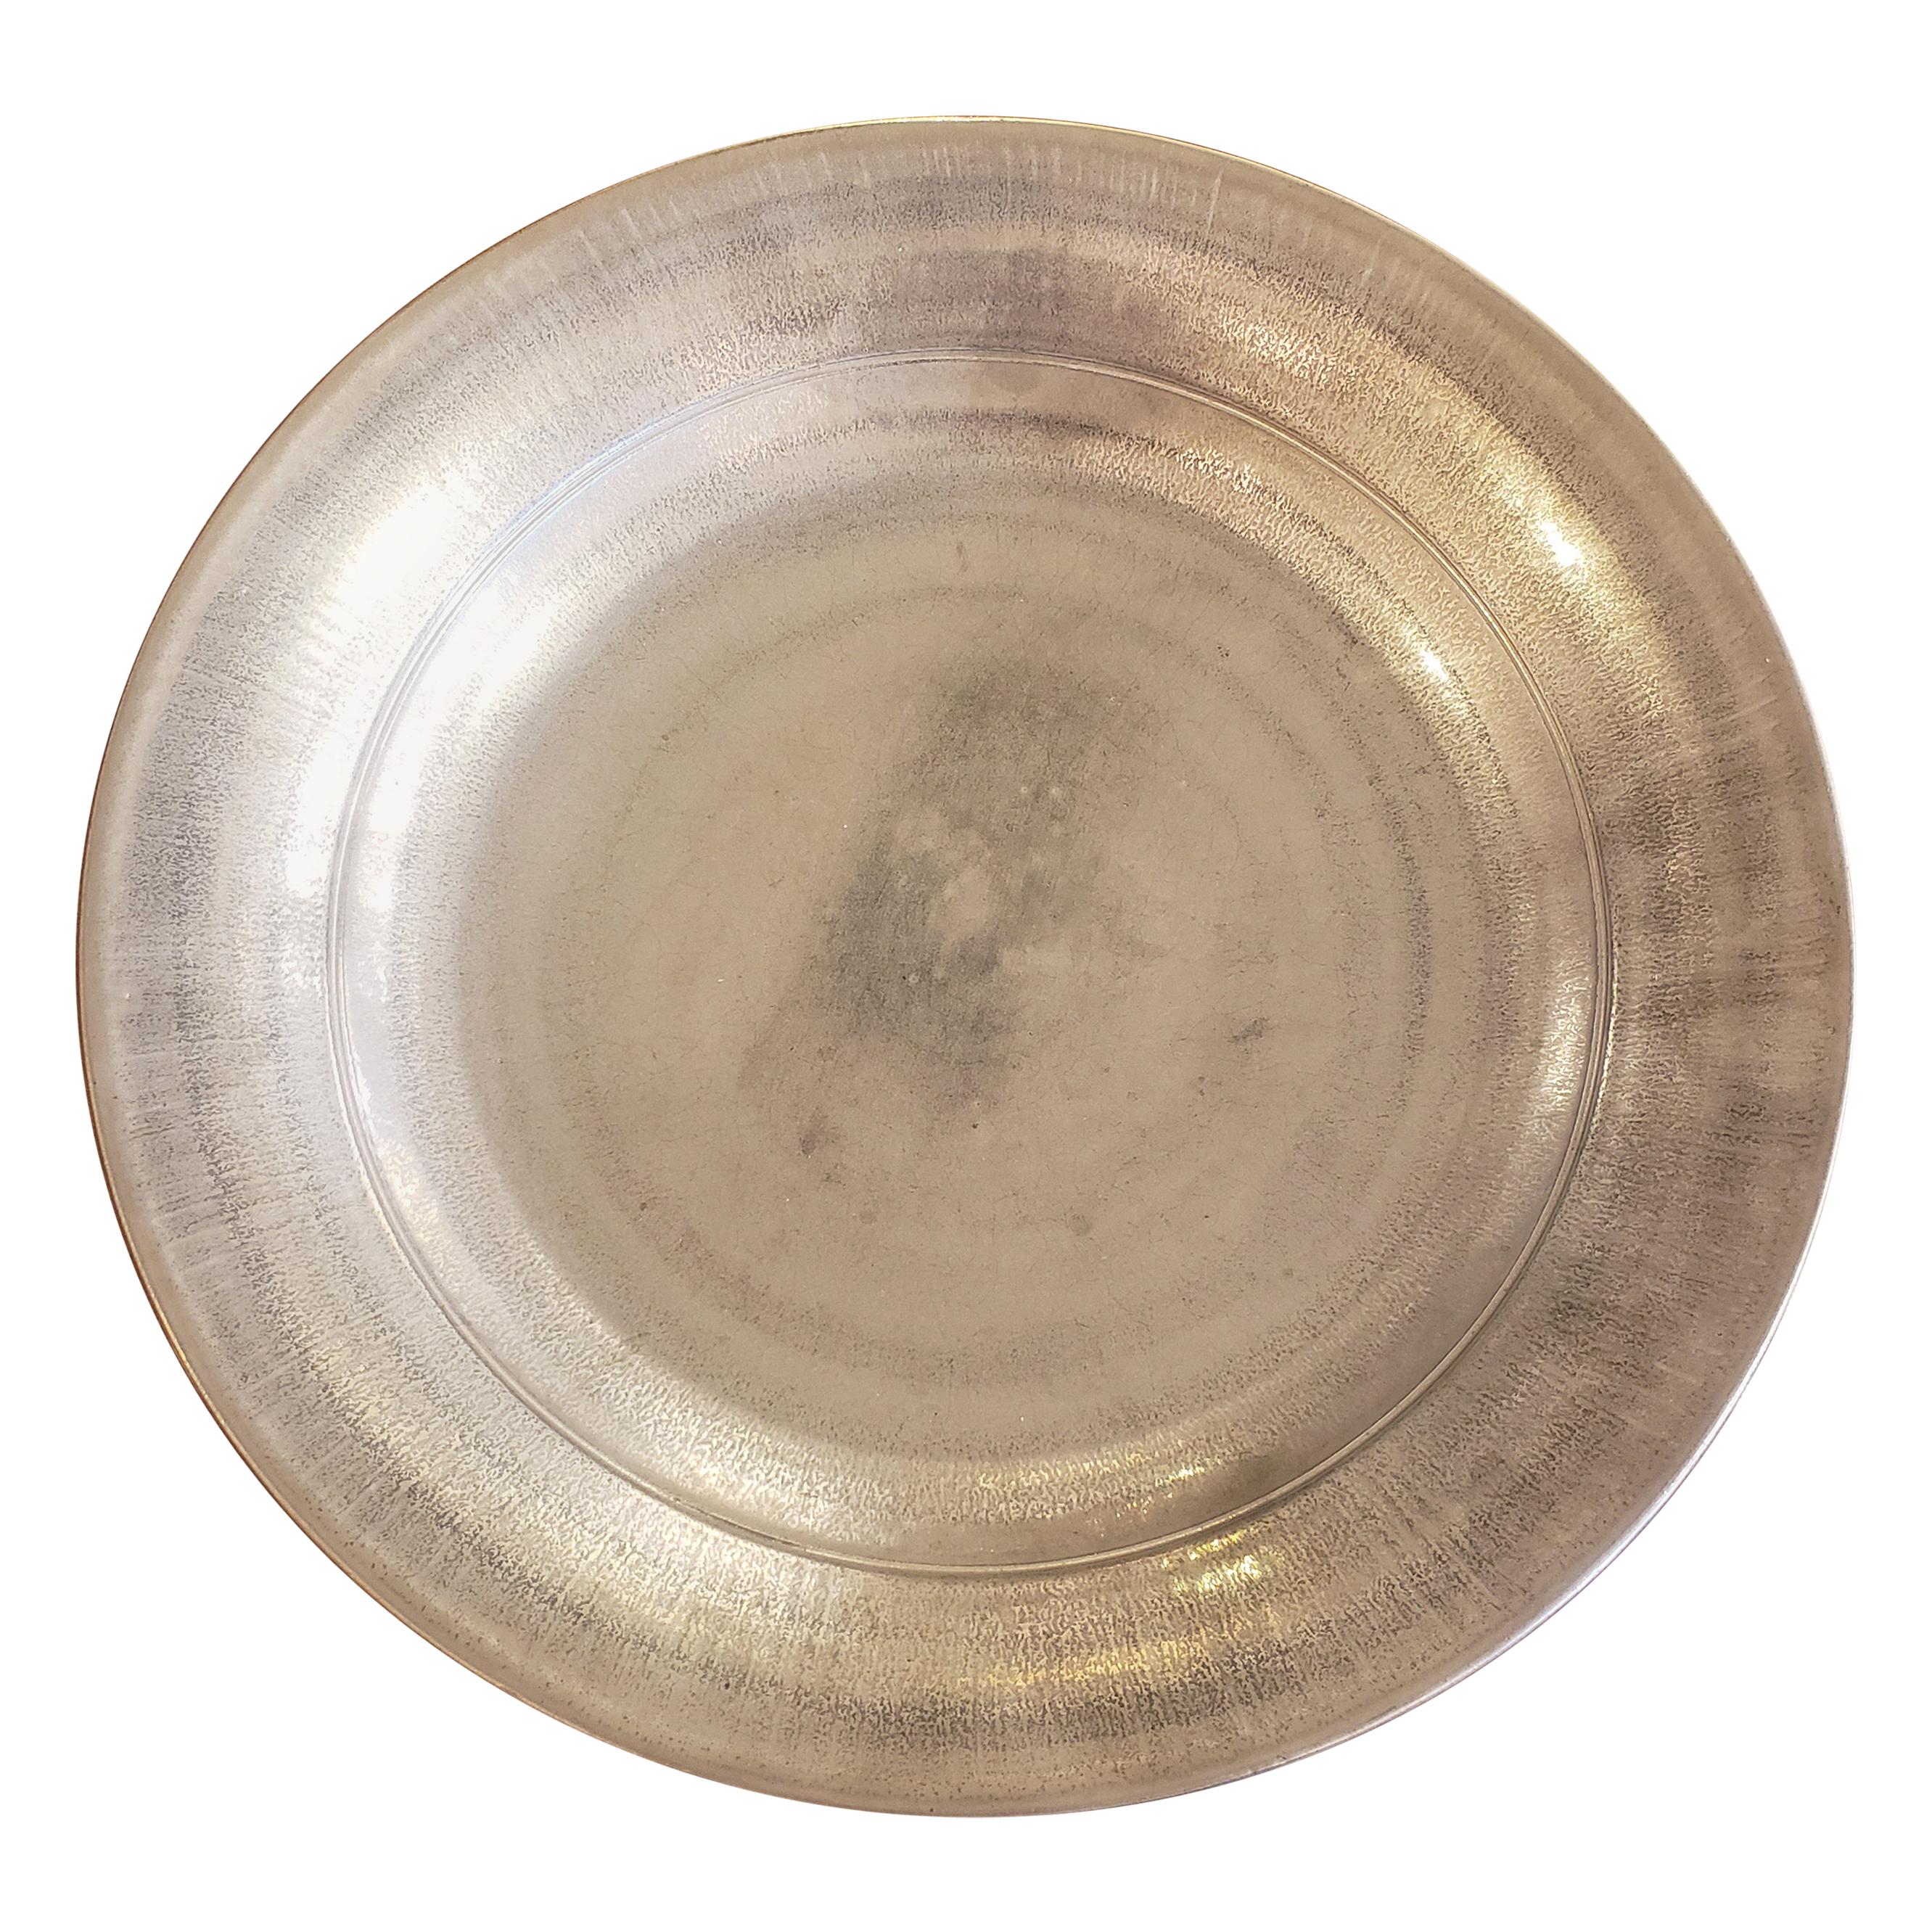 Silvered Porcelain Platter Signed and Dated on Verso